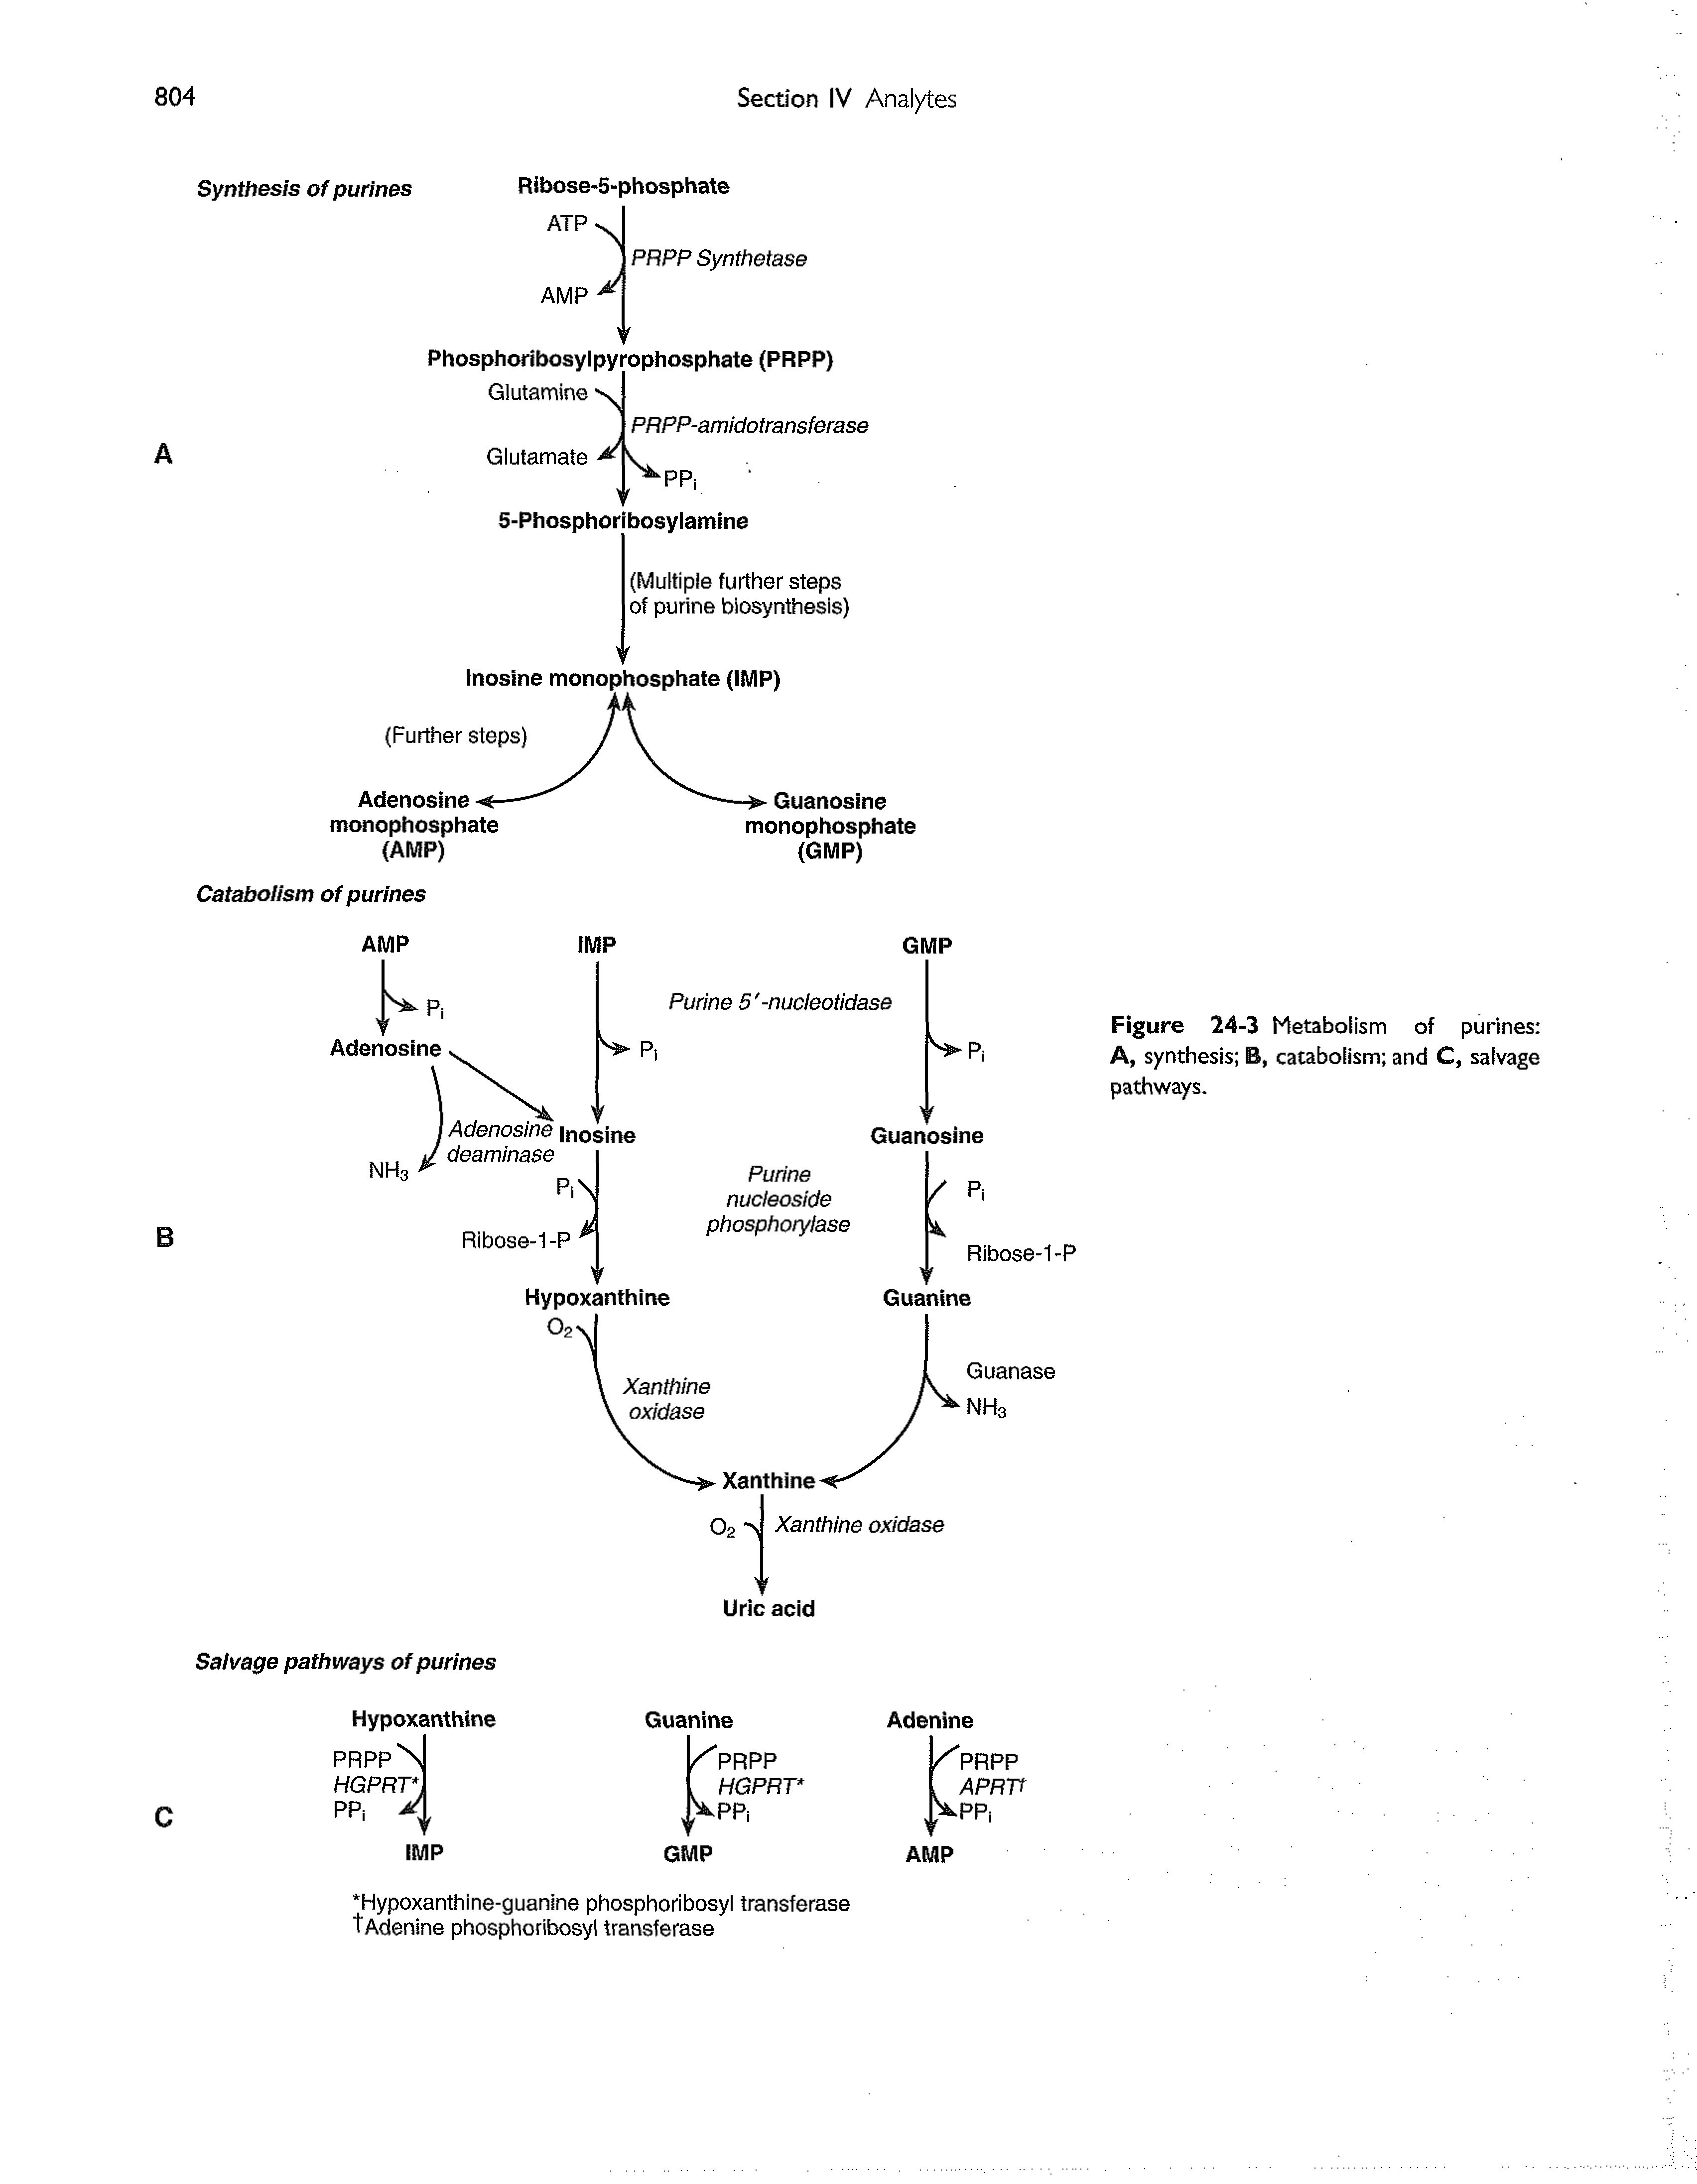 Figure 24-3 Metabolism of purines A, synthesis B, catabolism and C, salvage pathways.